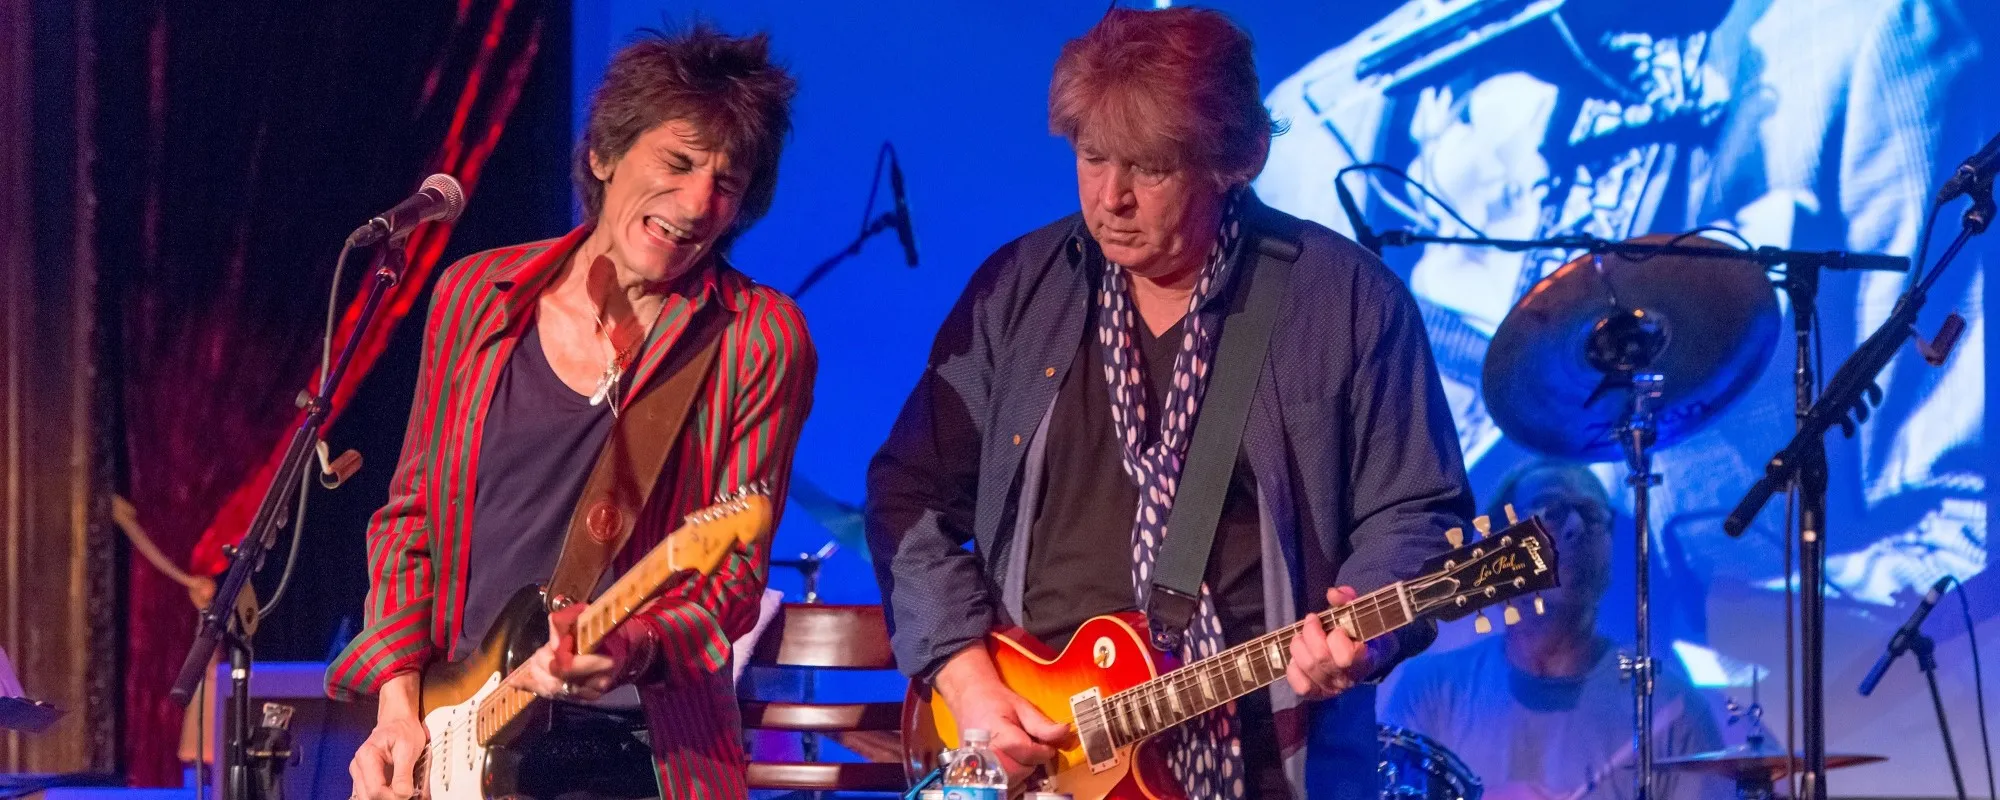 From One Rolling Stones Guitarist to Another: Ronnie Wood Sends Birthday Wishes to Mick Taylor